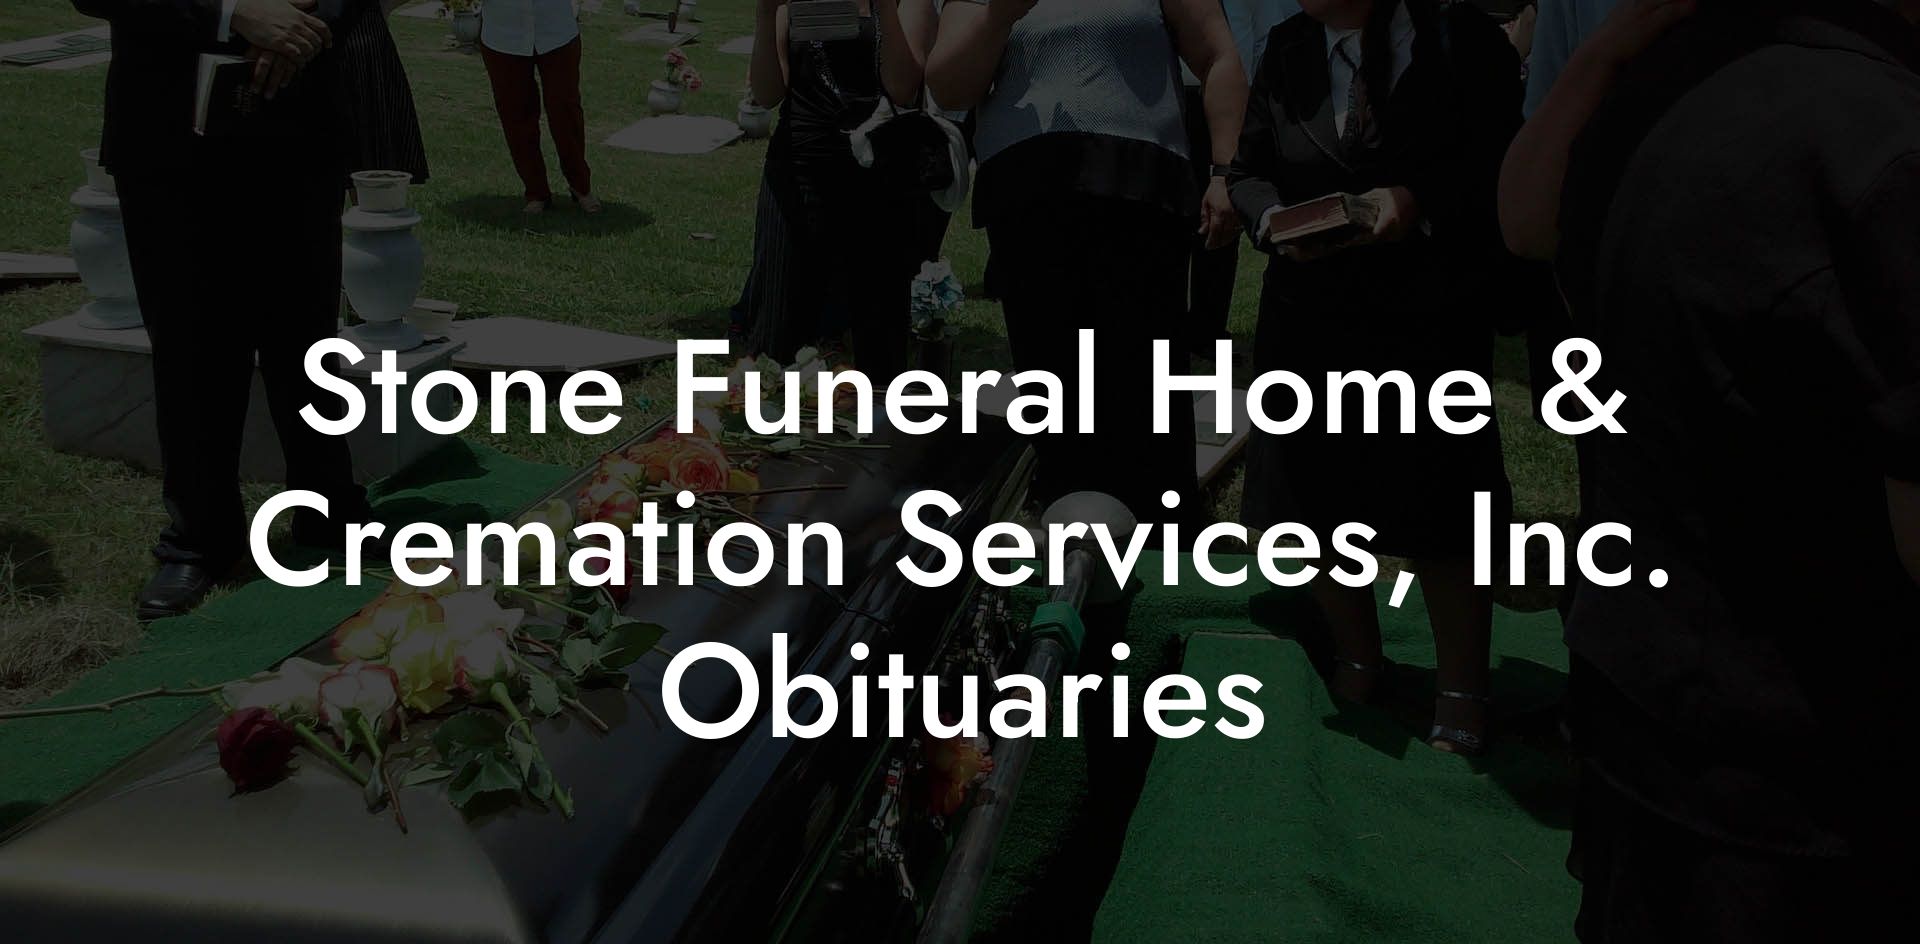 Stone Funeral Home & Cremation Services, Inc. Obituaries